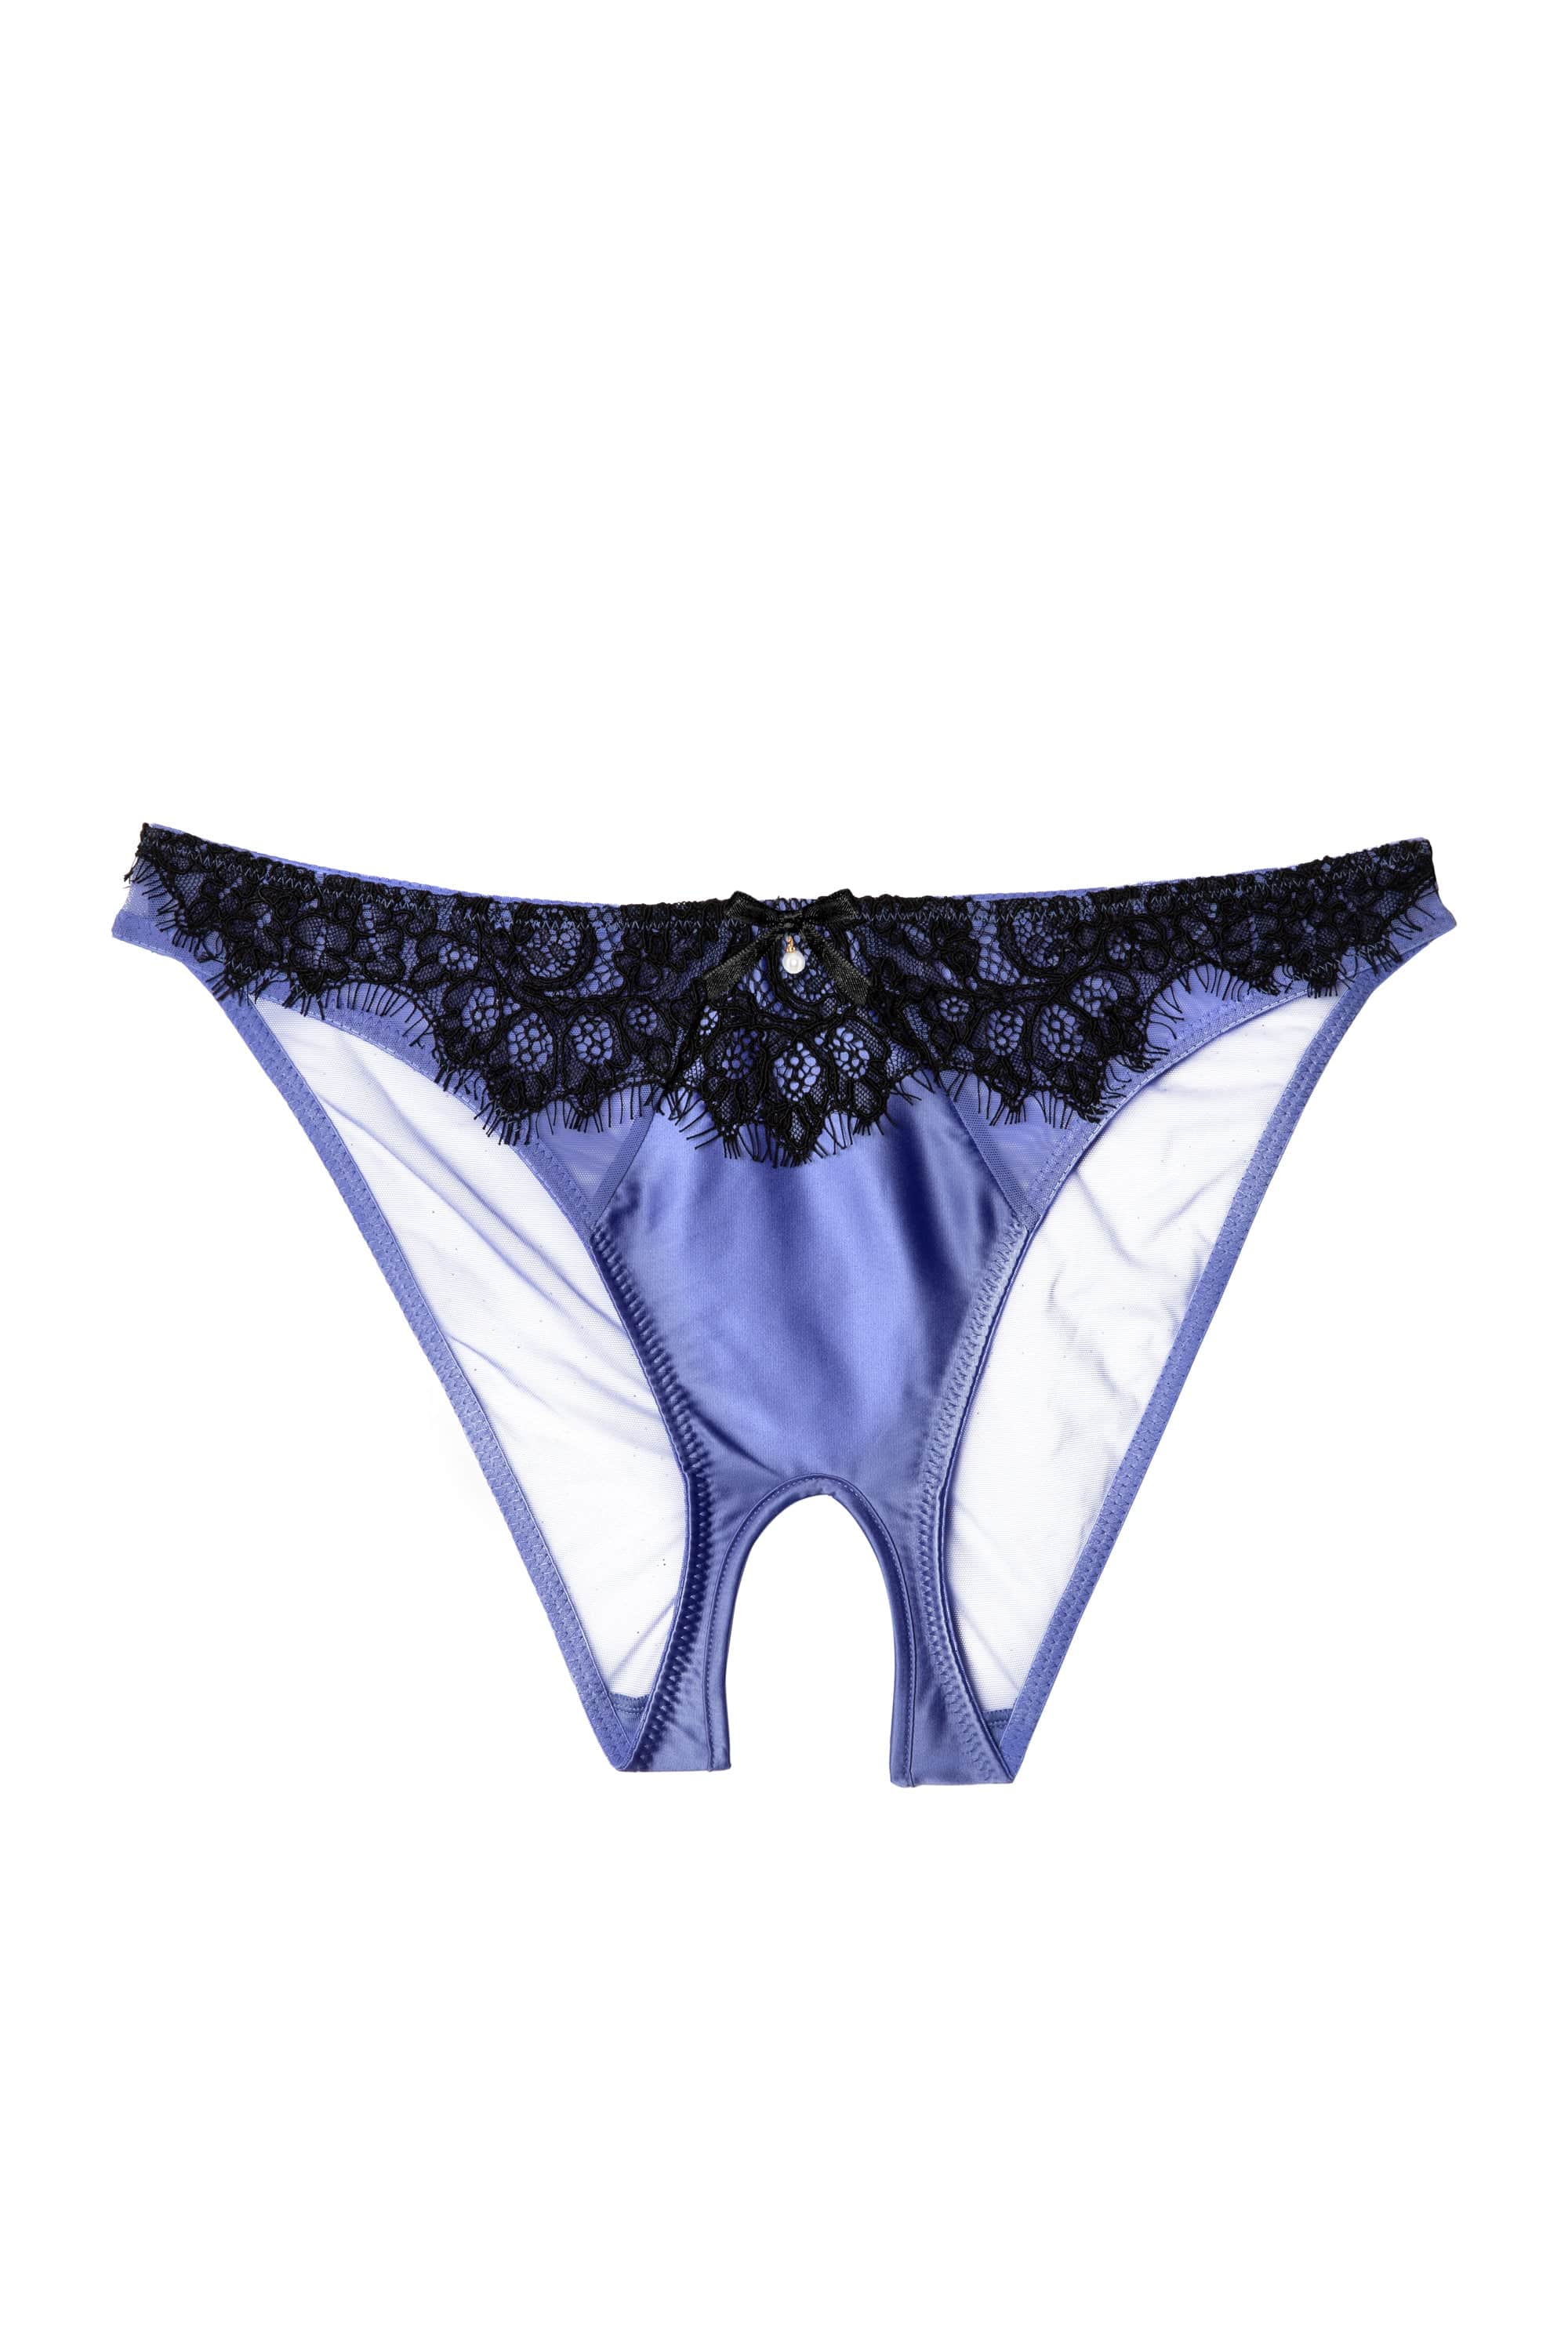 Stevie Lilac and Black Crotchless Brief